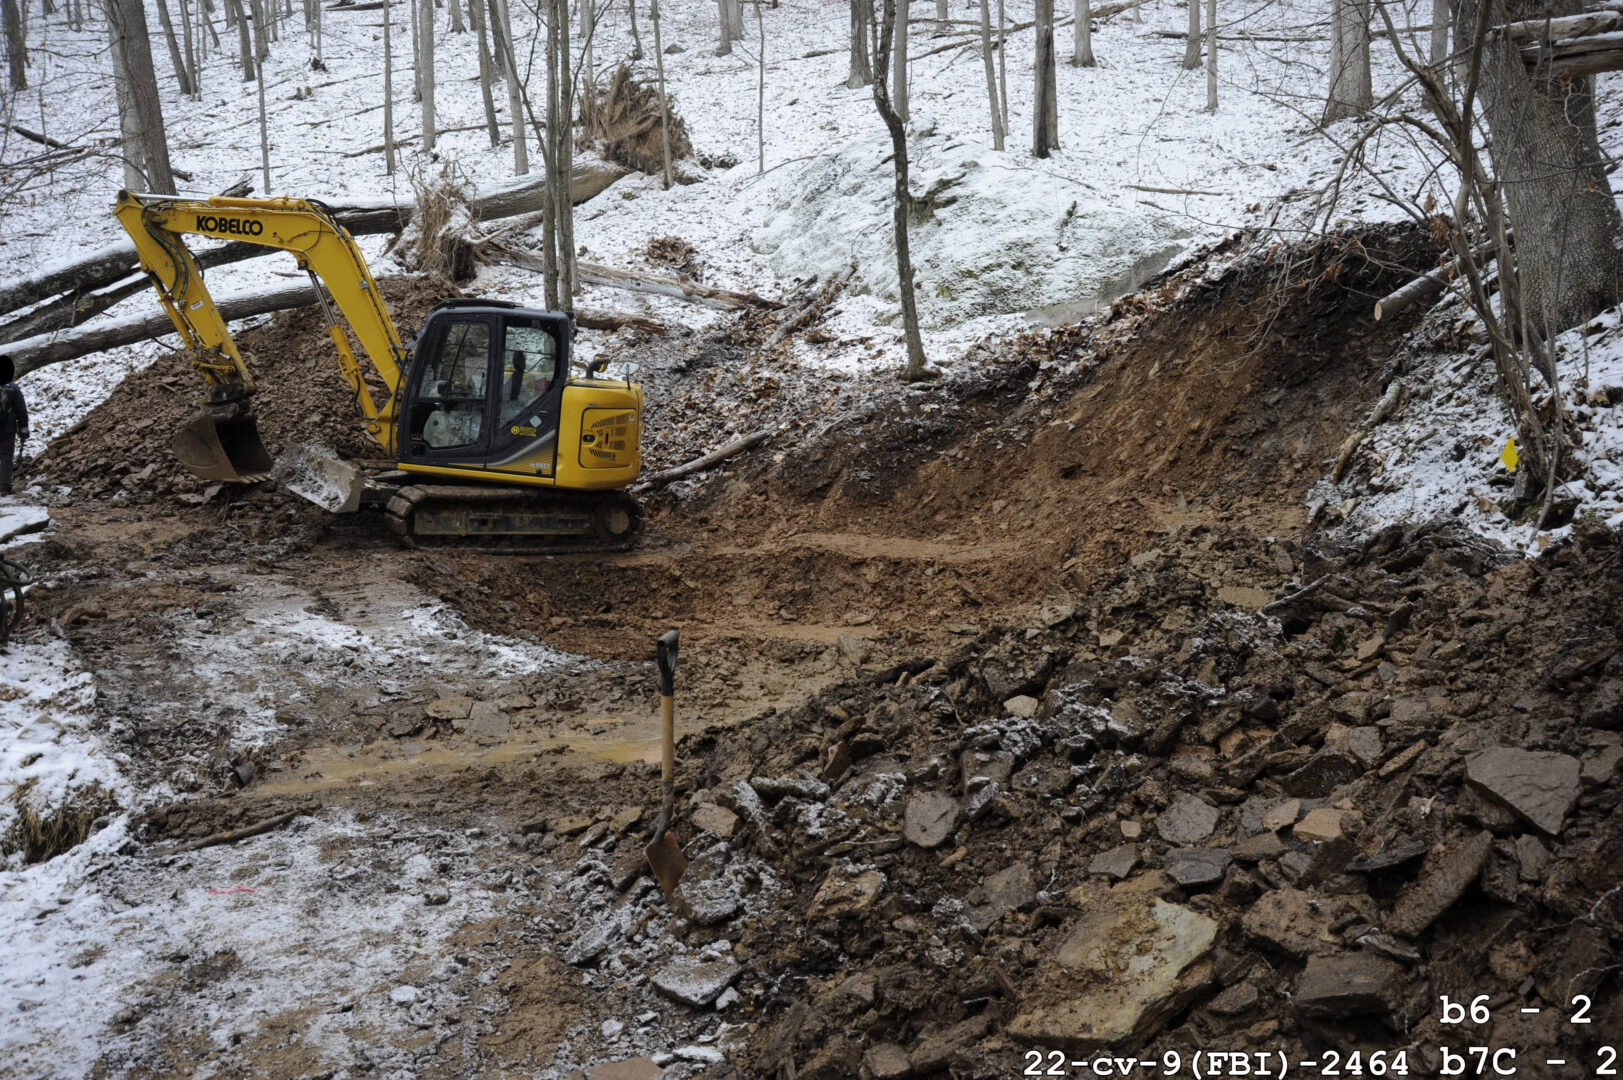 This 2018 photo released by Federal Bureau of Investigation shows the FBI's 2018 dig for Civil War-era gold at a remote site in Dents Run, Penn., after sophisticated testing suggested tons of gold might be buried there. The government says the dig came up empty, but a treasure hunter believes otherwise. (Federal Bureau of Investigation via AP)